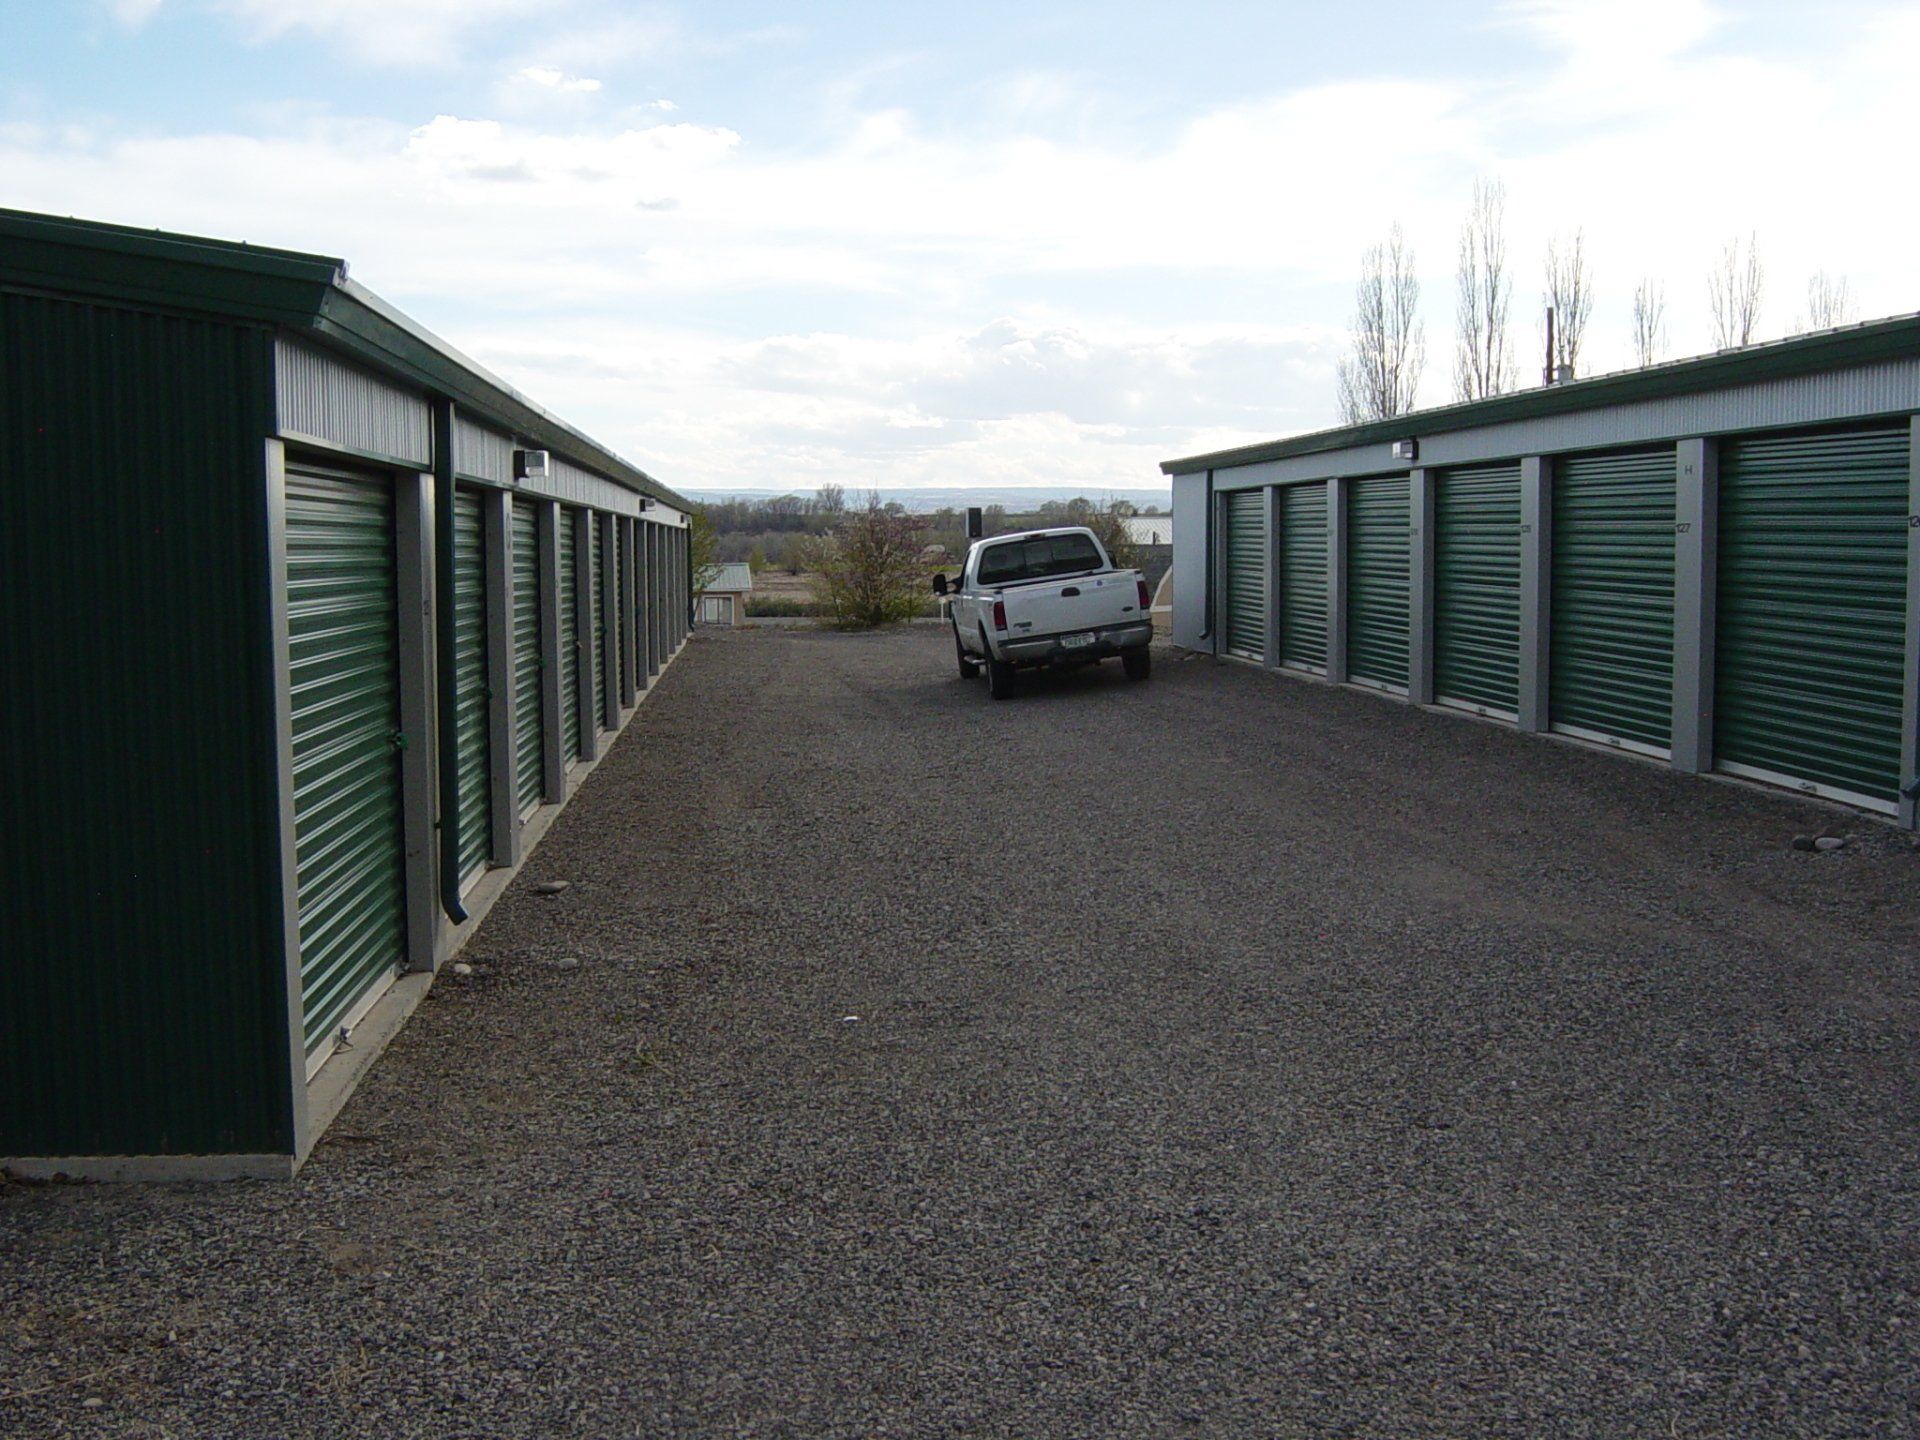 Internal Facility with Pick Up Truck - Affordable Storage in Delta, CO